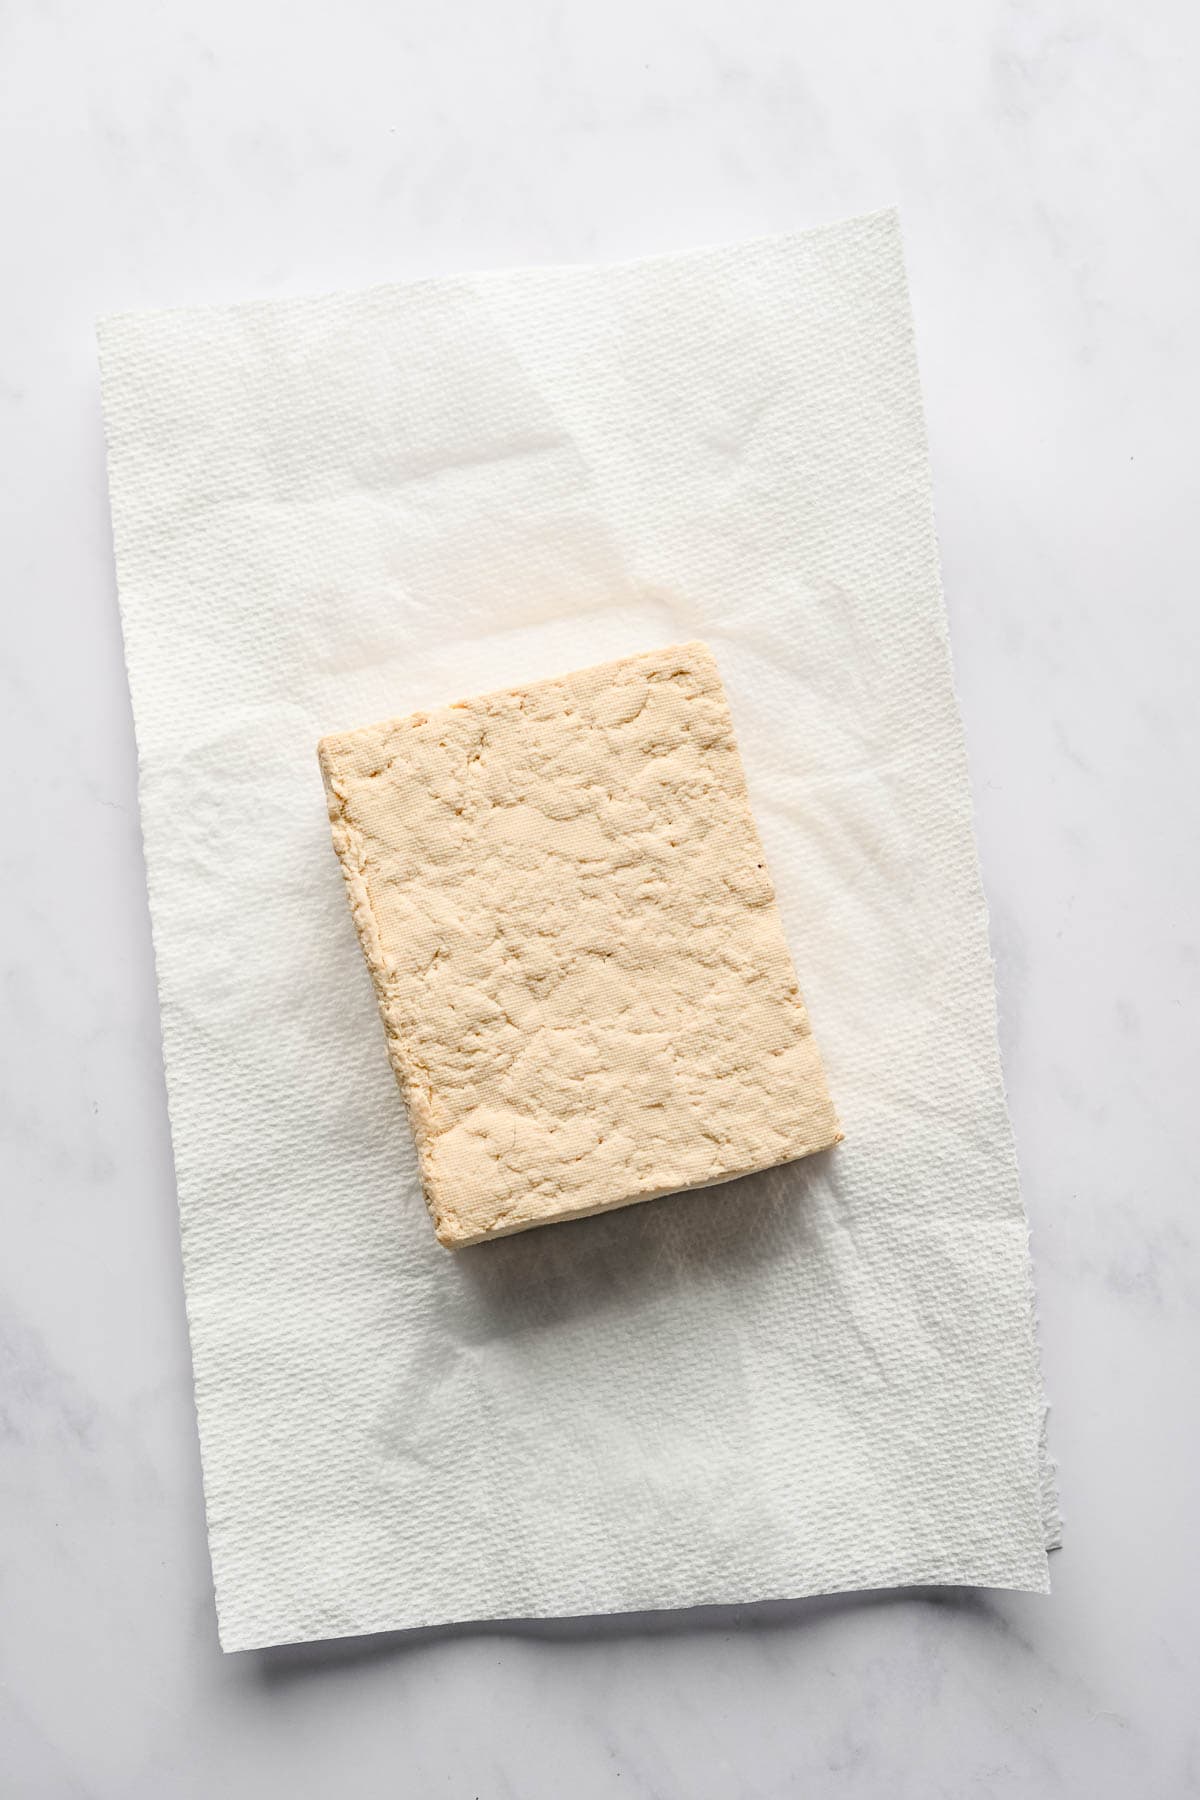 A block of tofu on top of a paper towel.